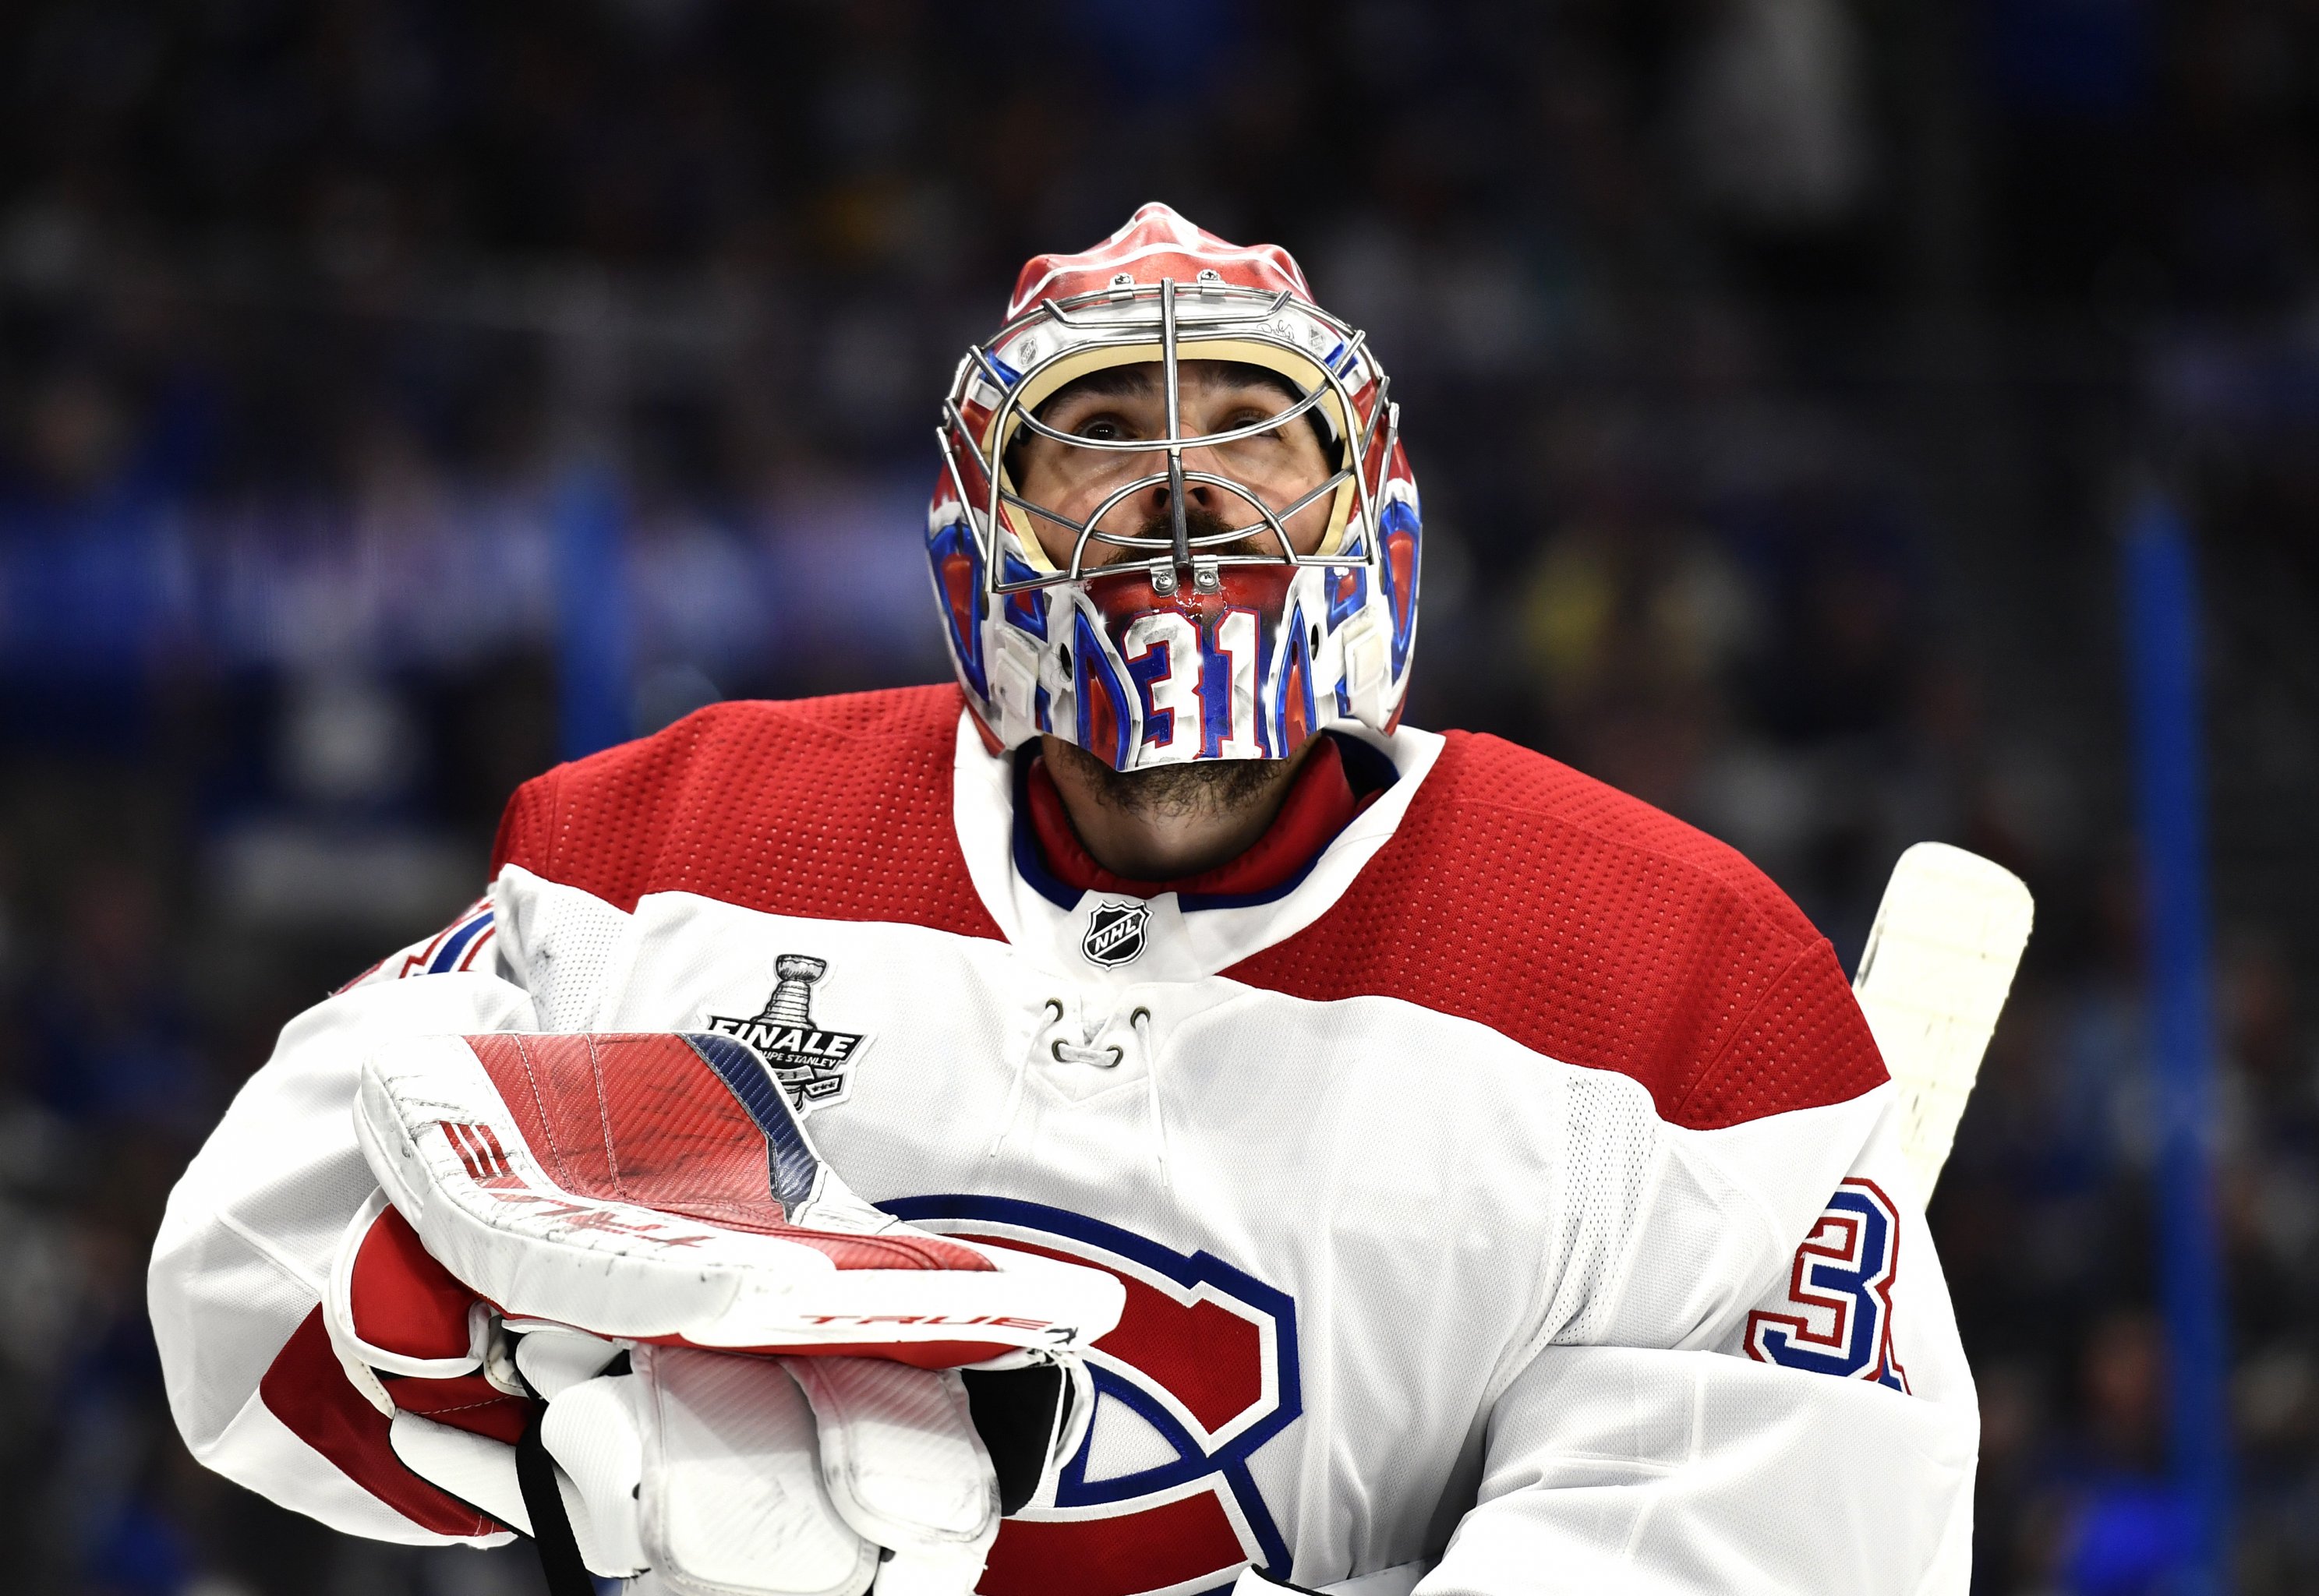 Goalie Power Rankings: Every NHL Team's Tandem from 32 to 1